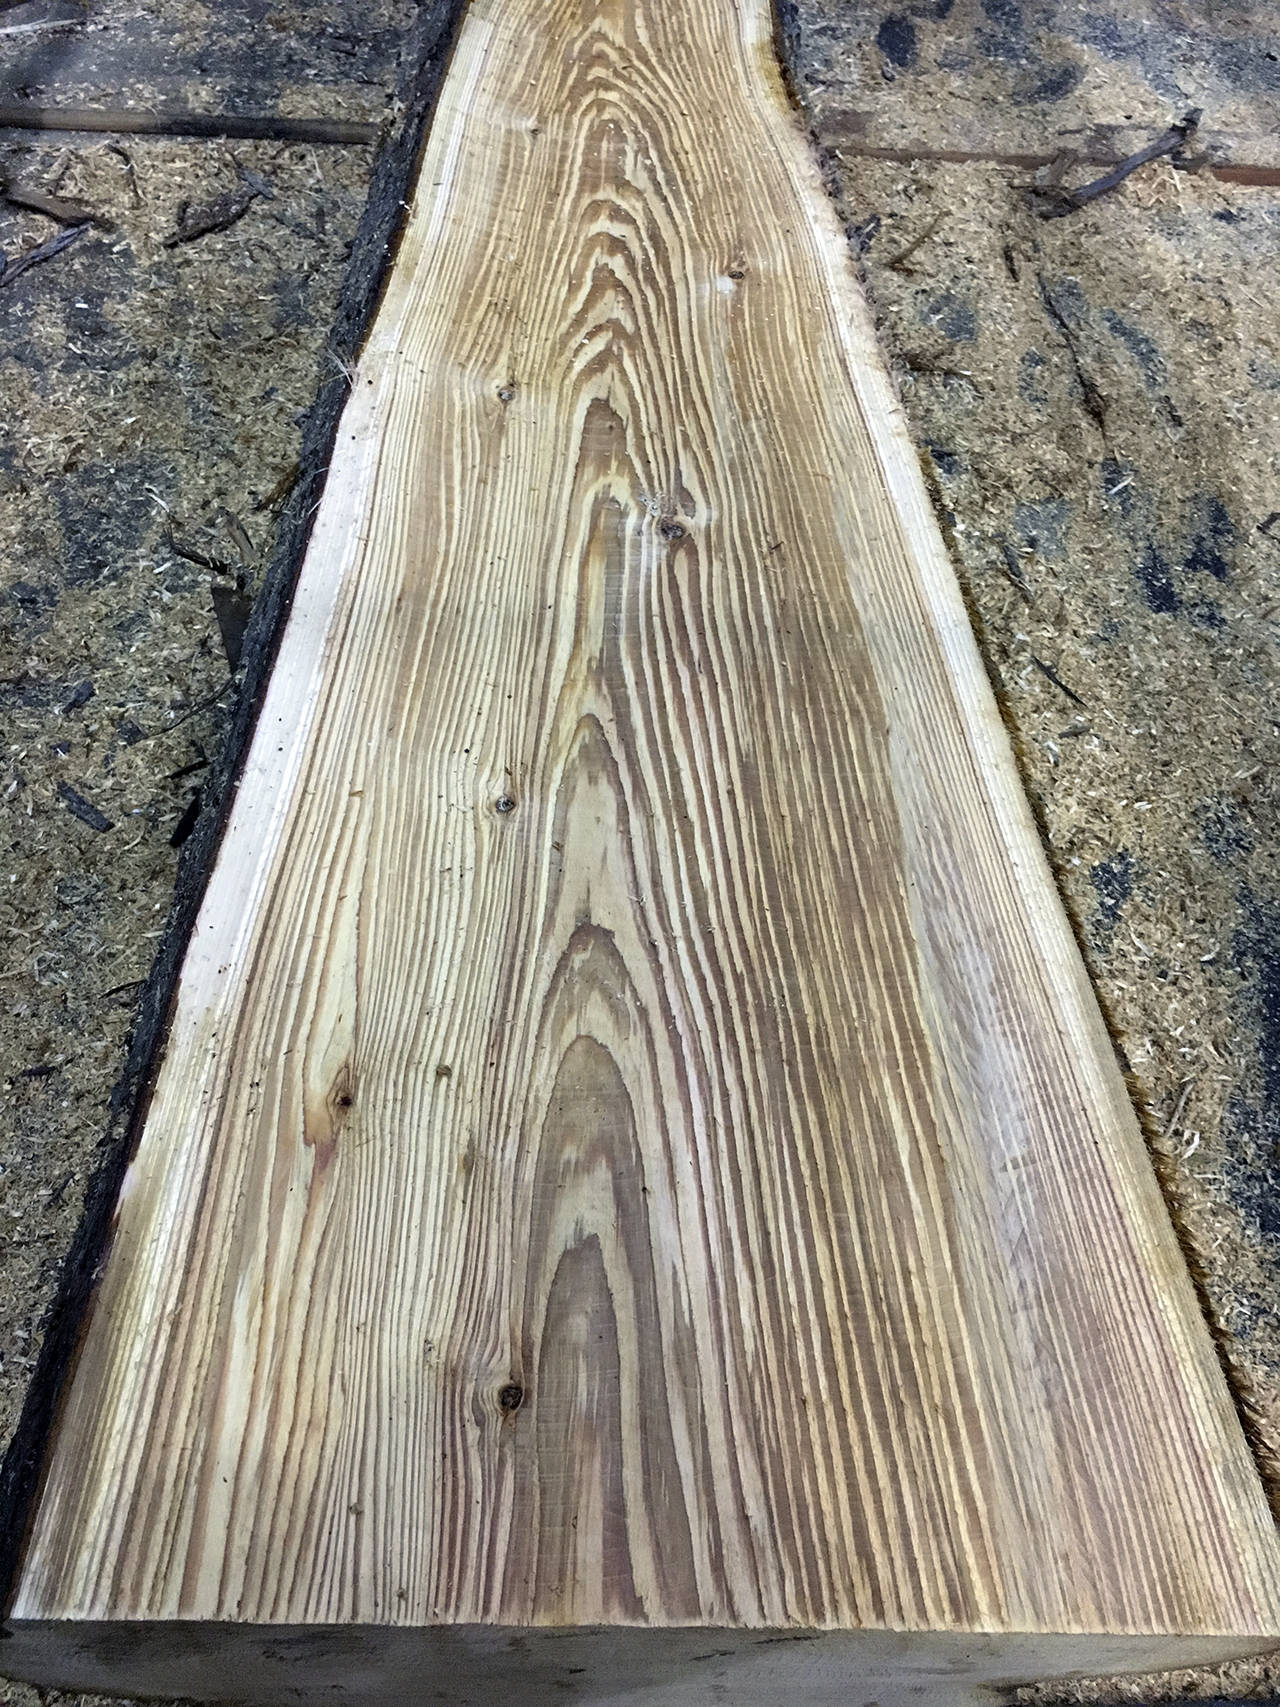 This half-milled cedar log from the Moclips site shows a nice grain.